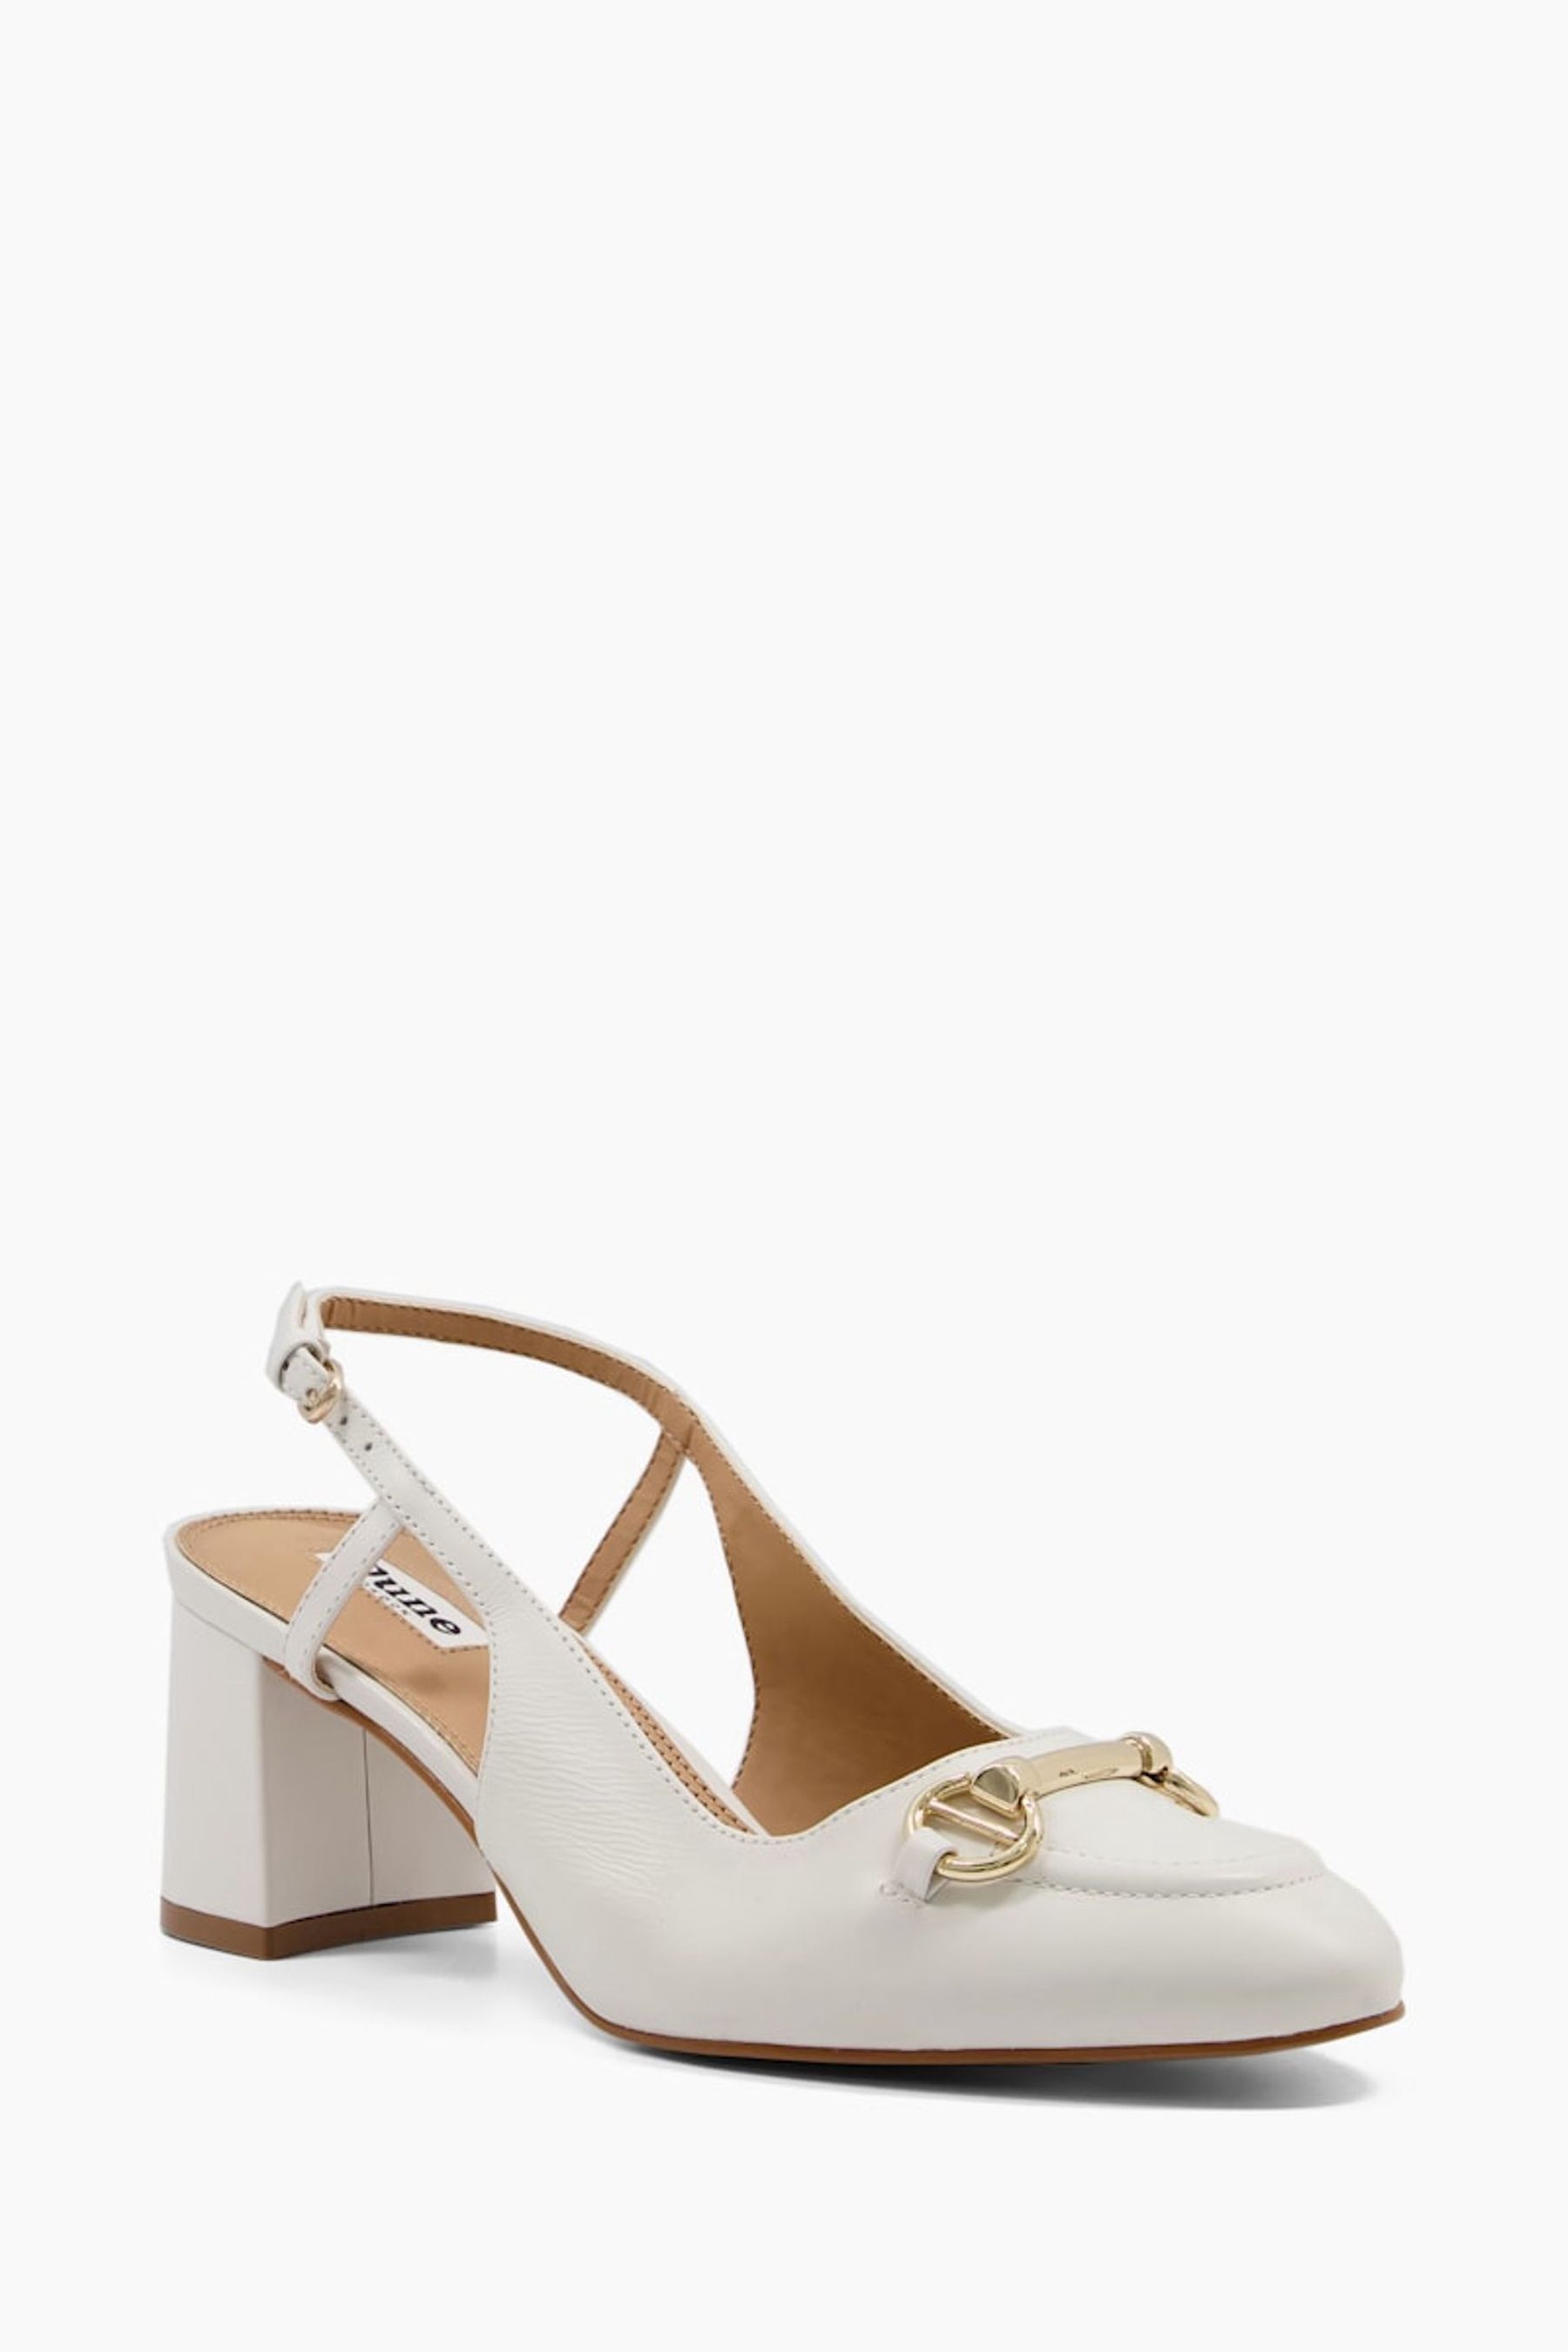 Buy Dune London White Wide Fit Cassie Snaffle Open Court Shoes from the ...